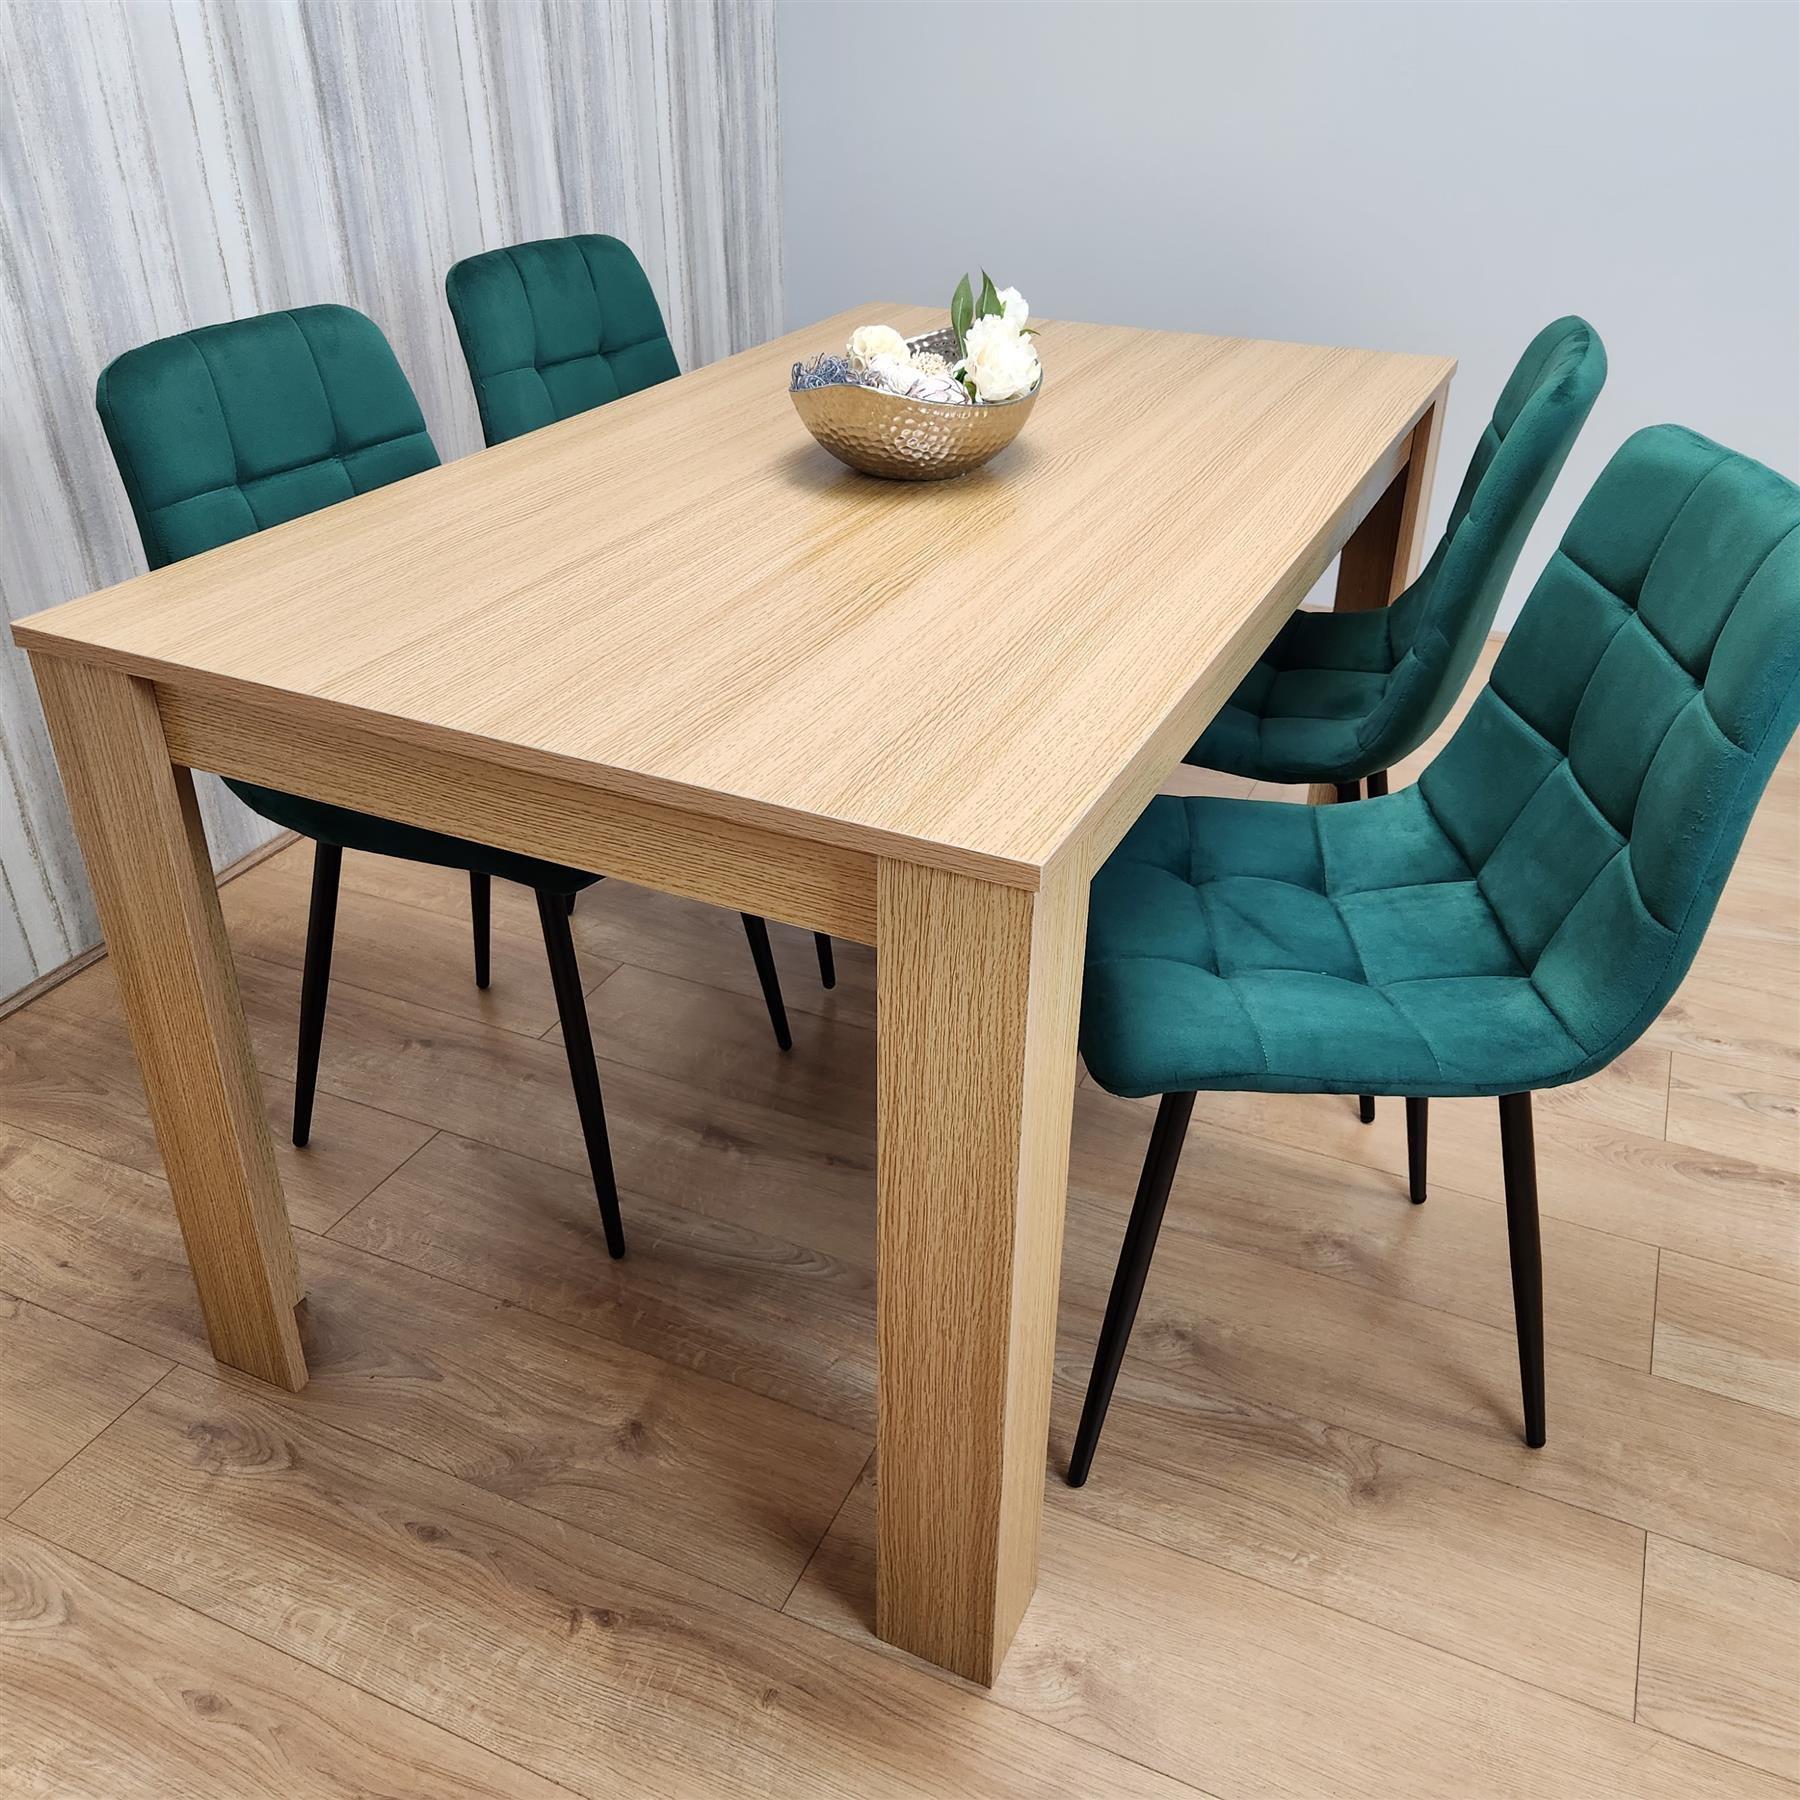 Dining Set of 4 Oak Effect Dining Table and 4 Green Velvet Chairs Dining Room Furniture